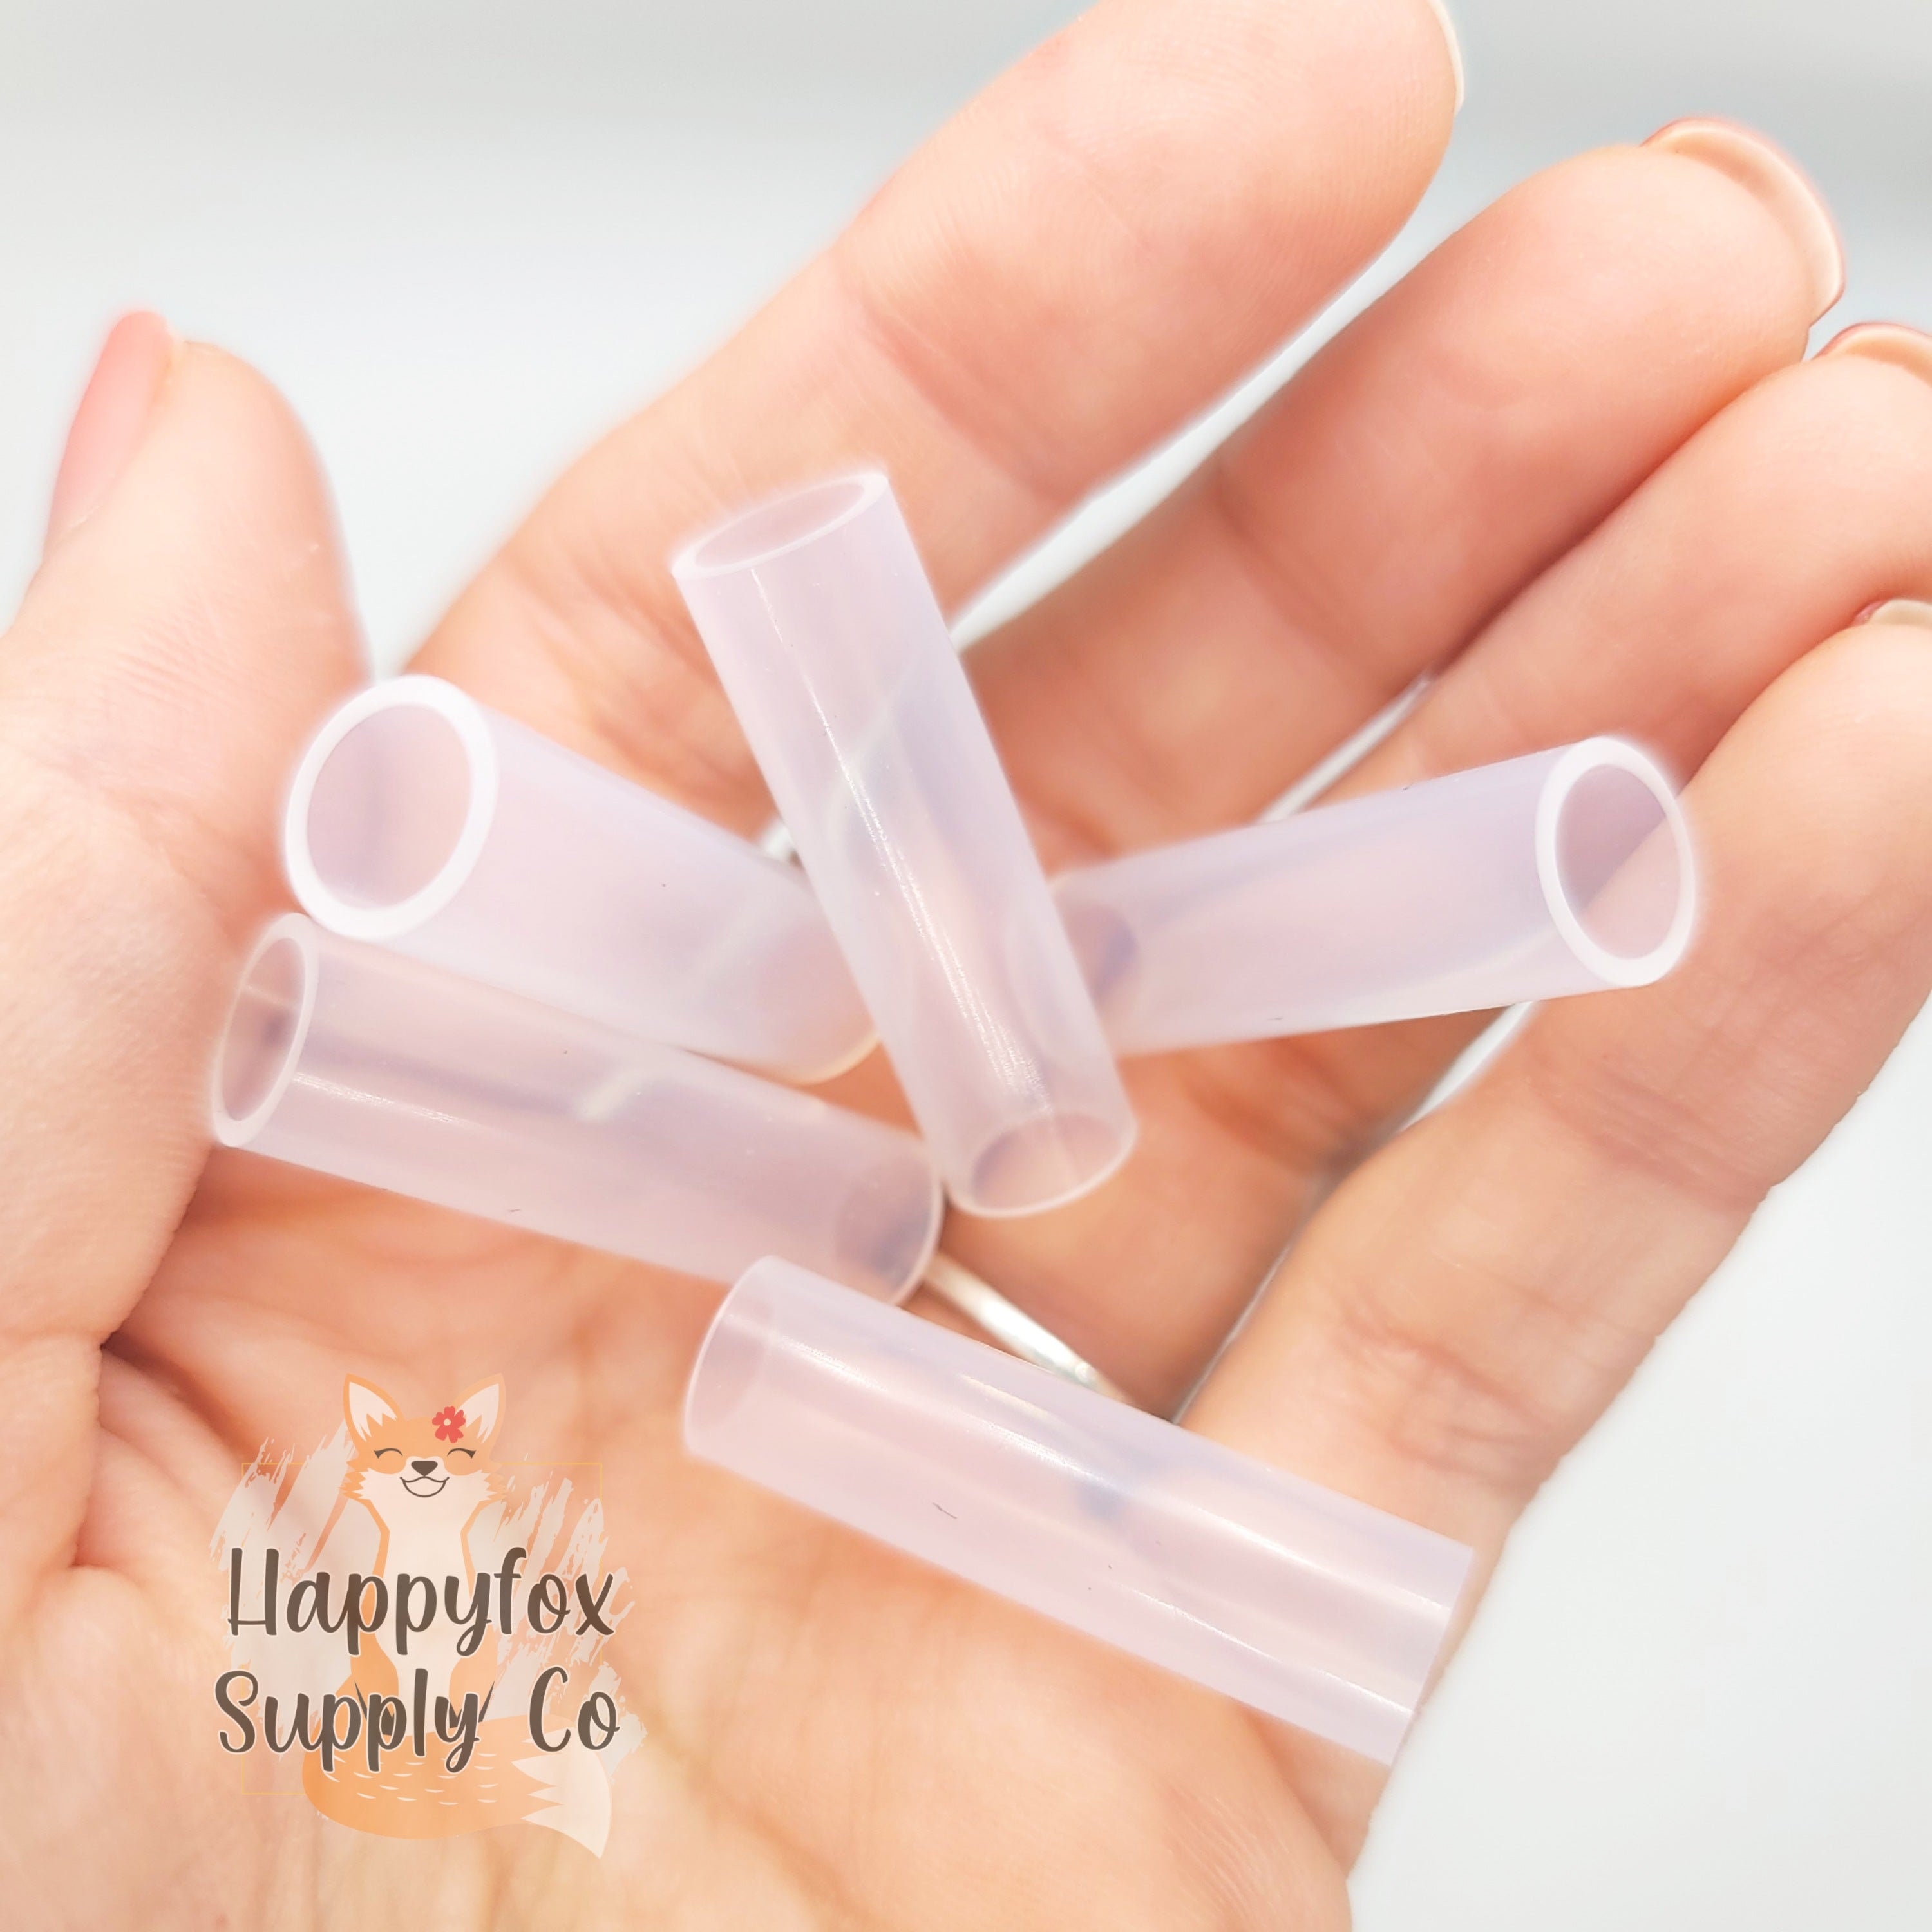 Curved Silicone Tip for 8mm Straws — The Ecoporium